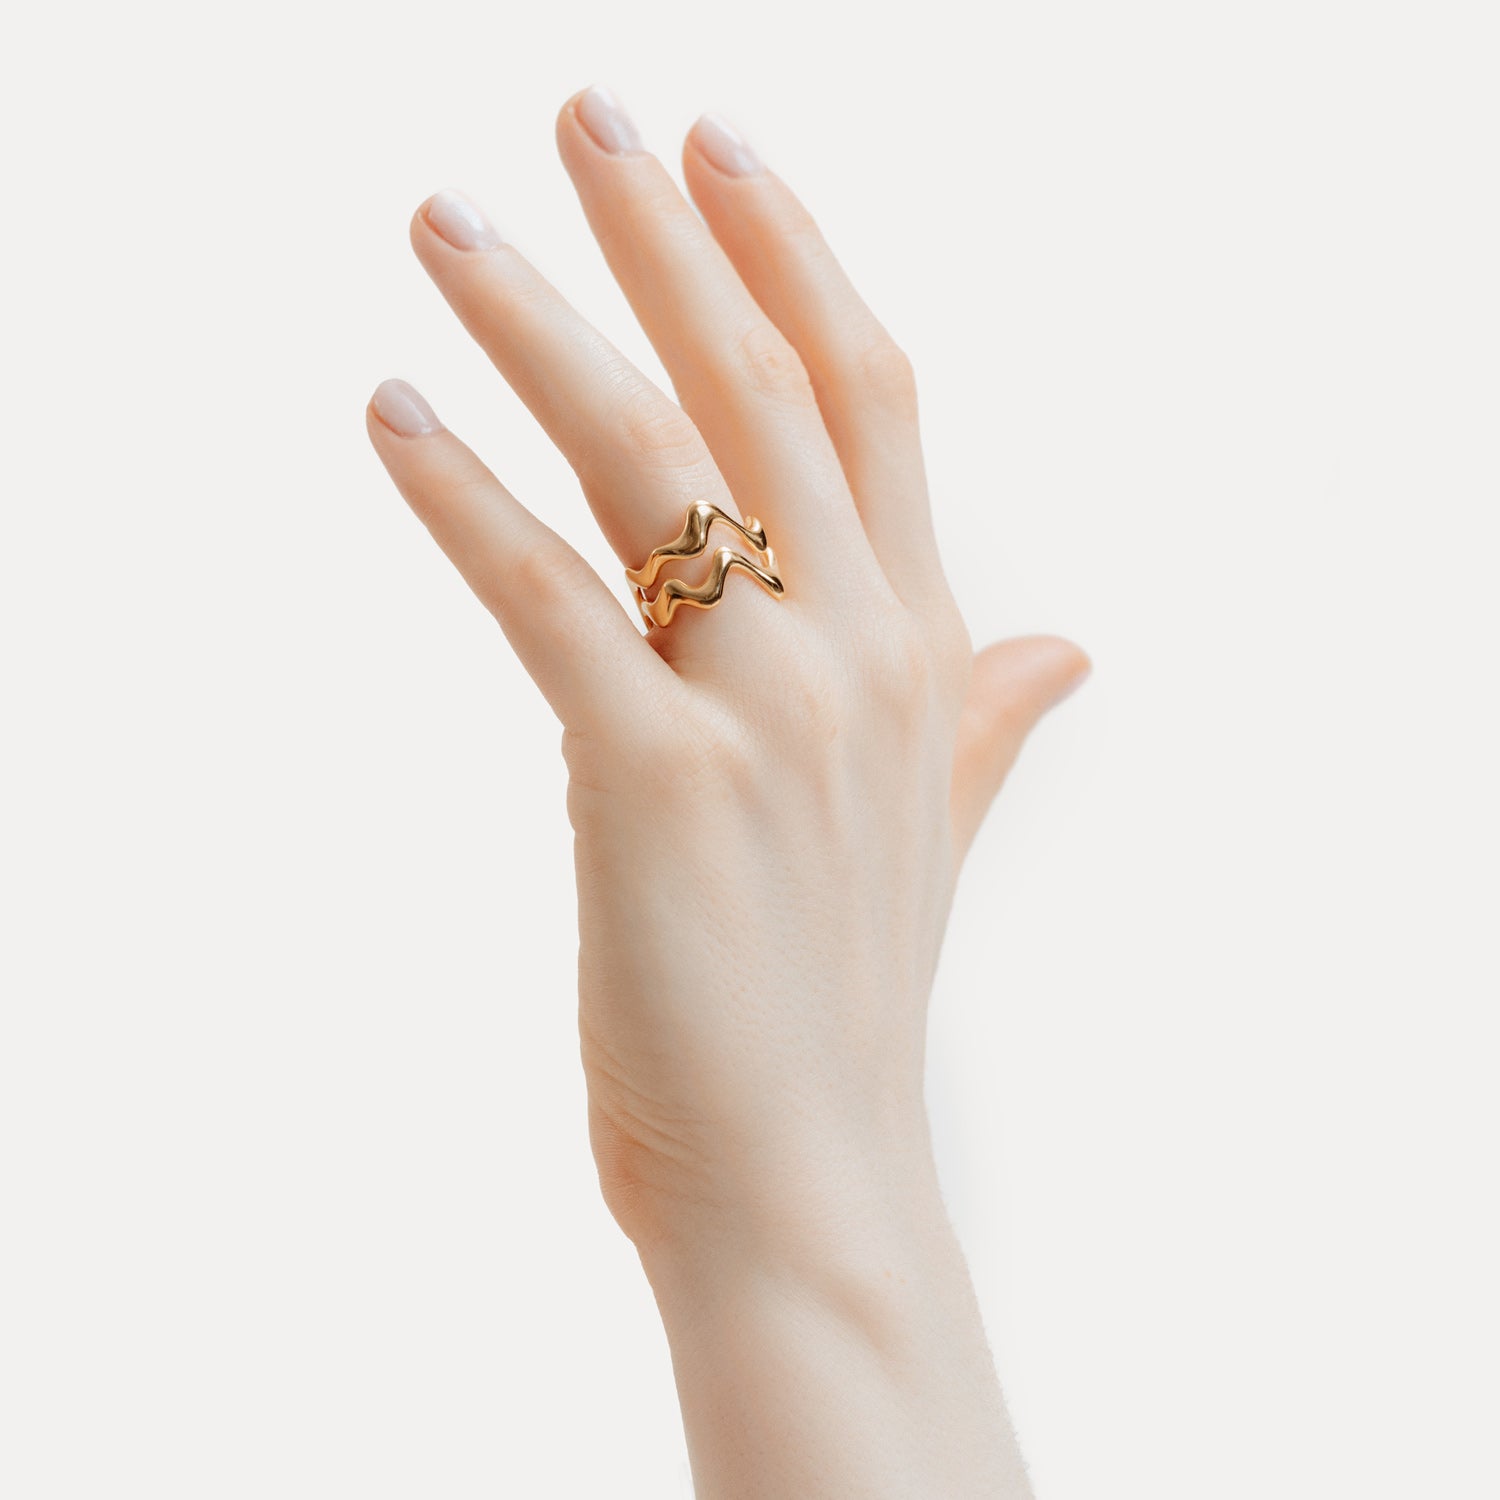 Poise Double Pre-Stacked Ring, recycled 18k Gold Vermeil, shown on hand - VEYIA Berlin